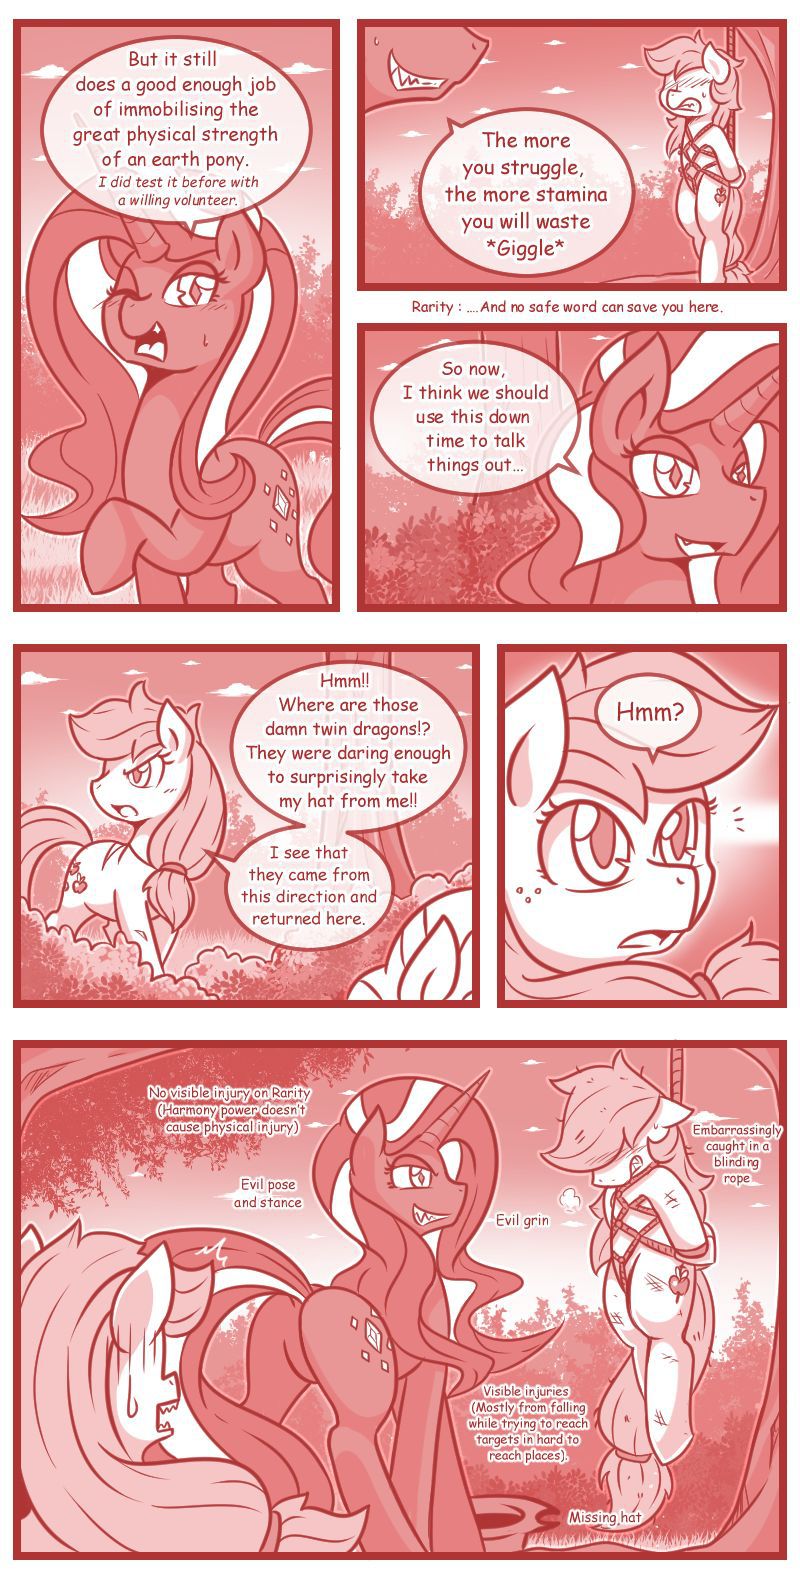 [Vavacung] Chaos Future (My Little Pony: Friendship is Magic) [Ongoing] 43